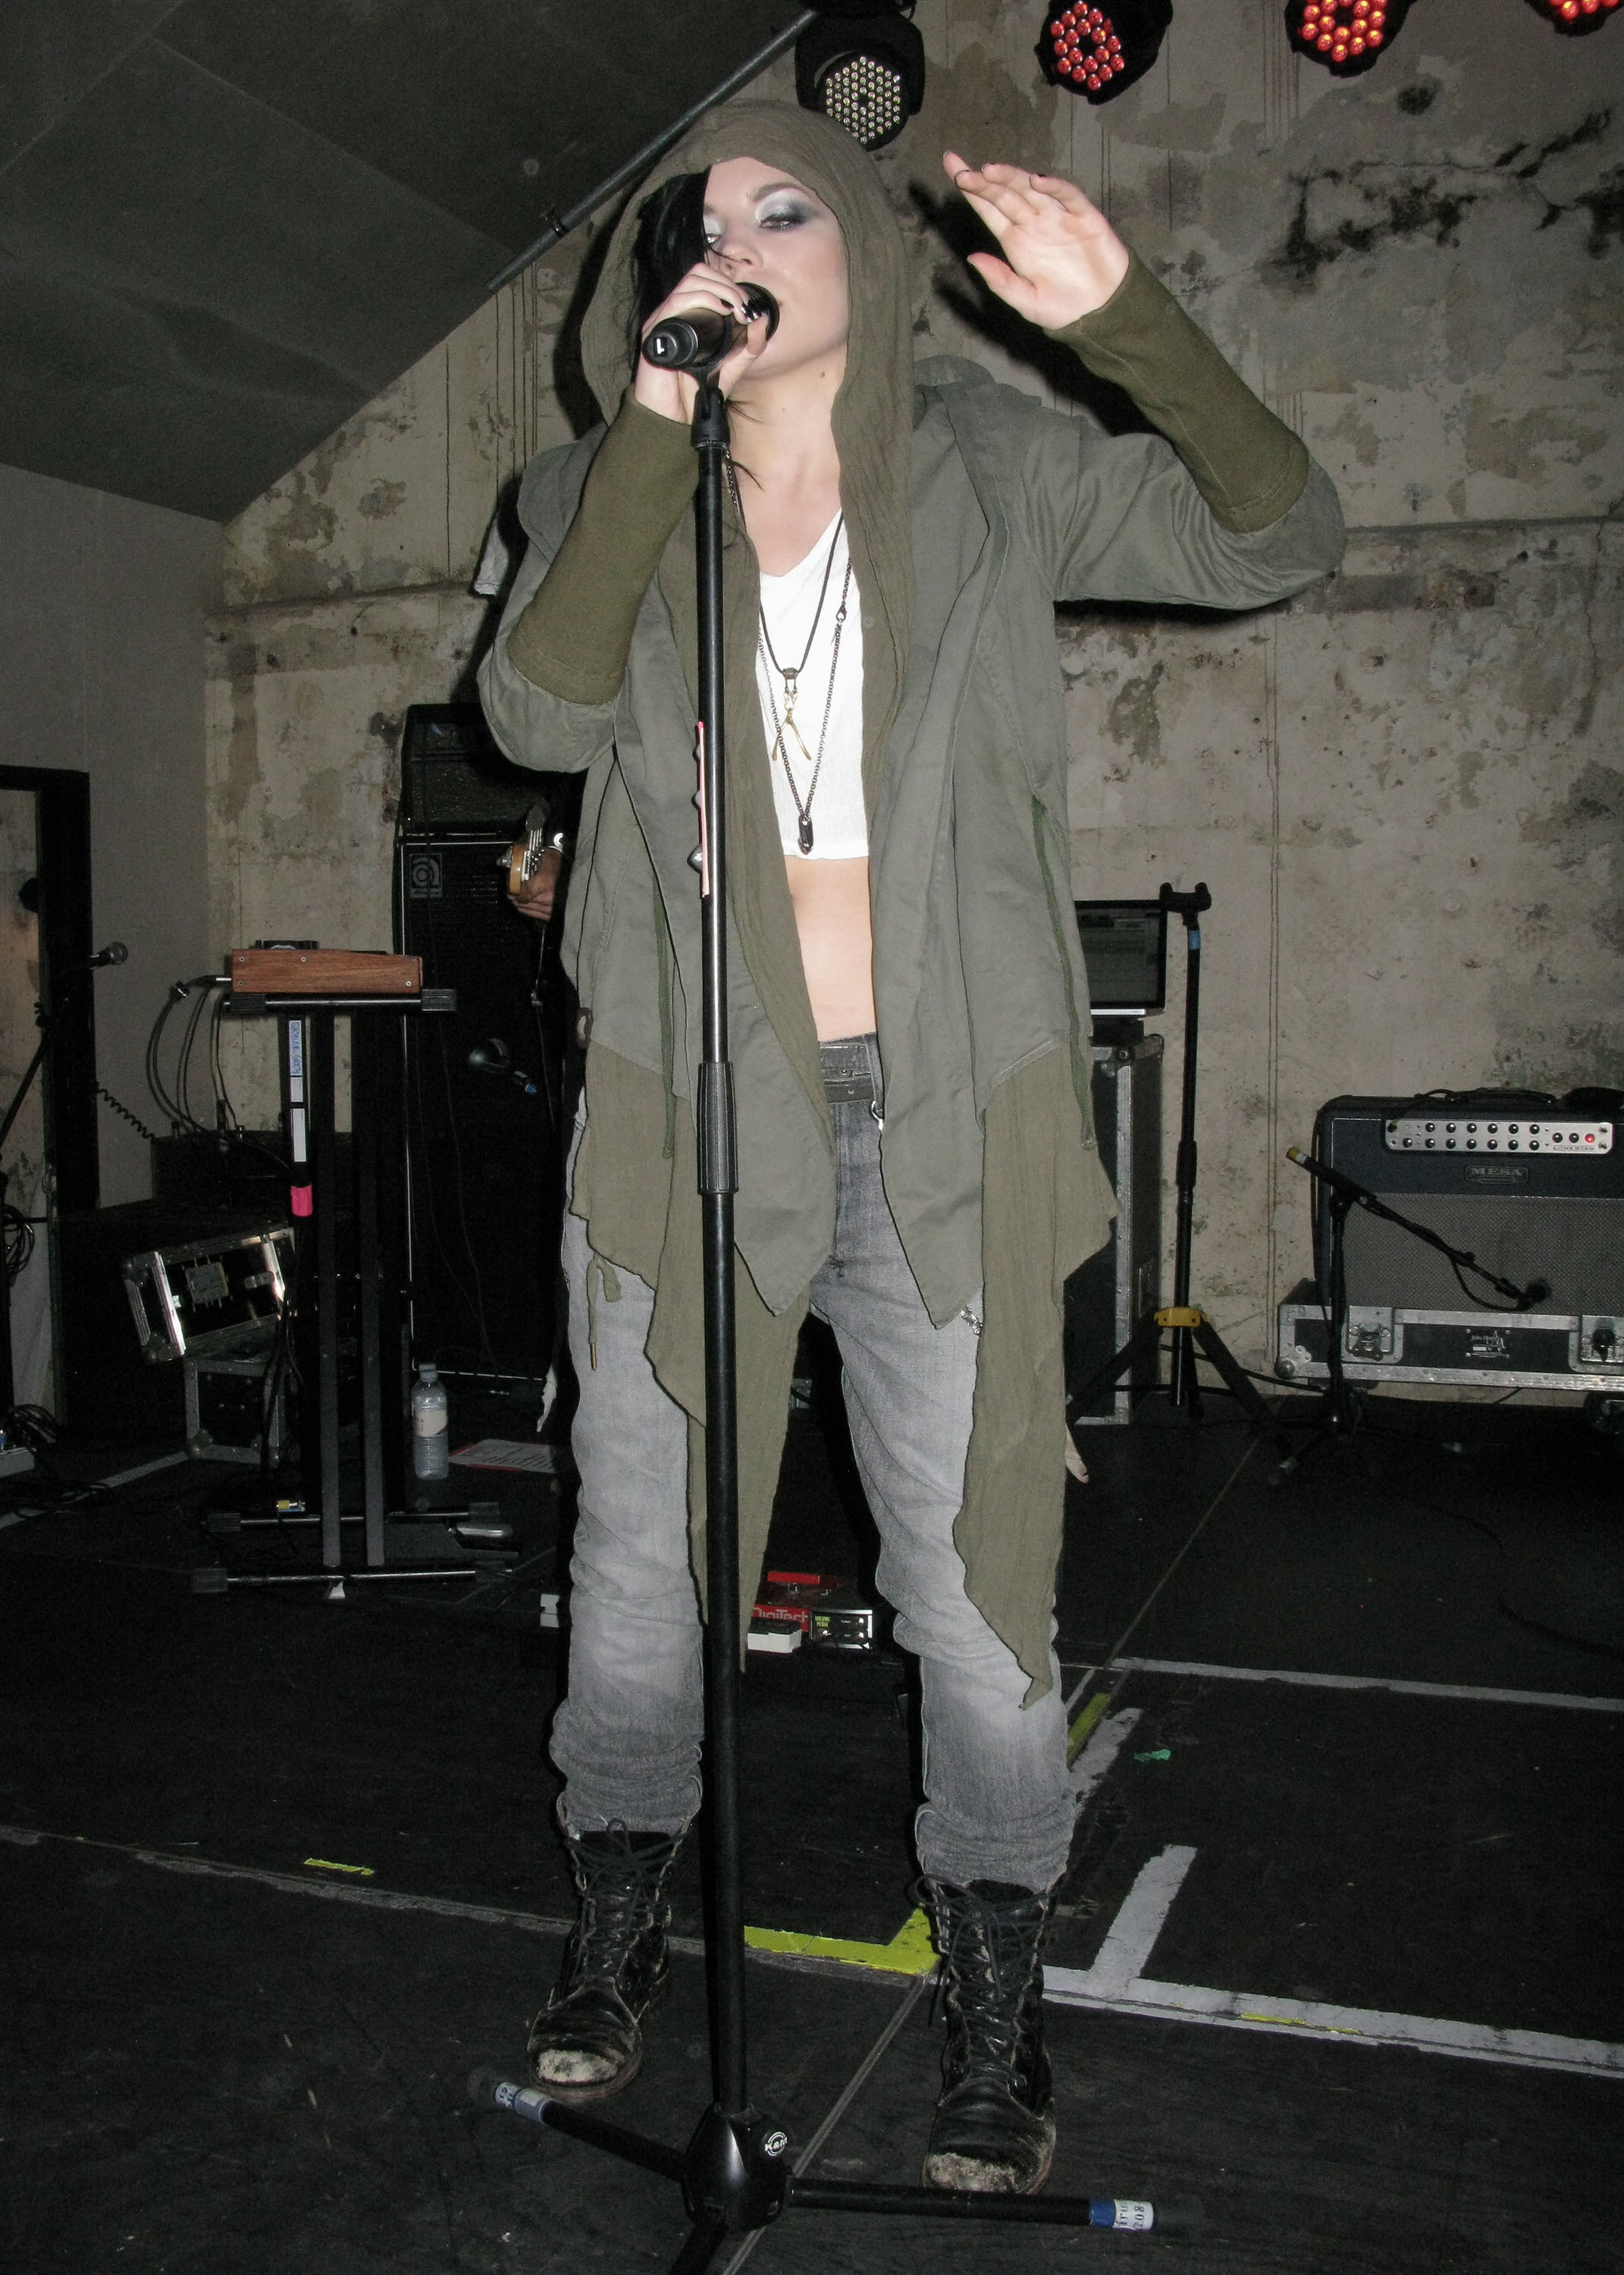 Skylar Grey performing her first gig pictures | Picture 63555